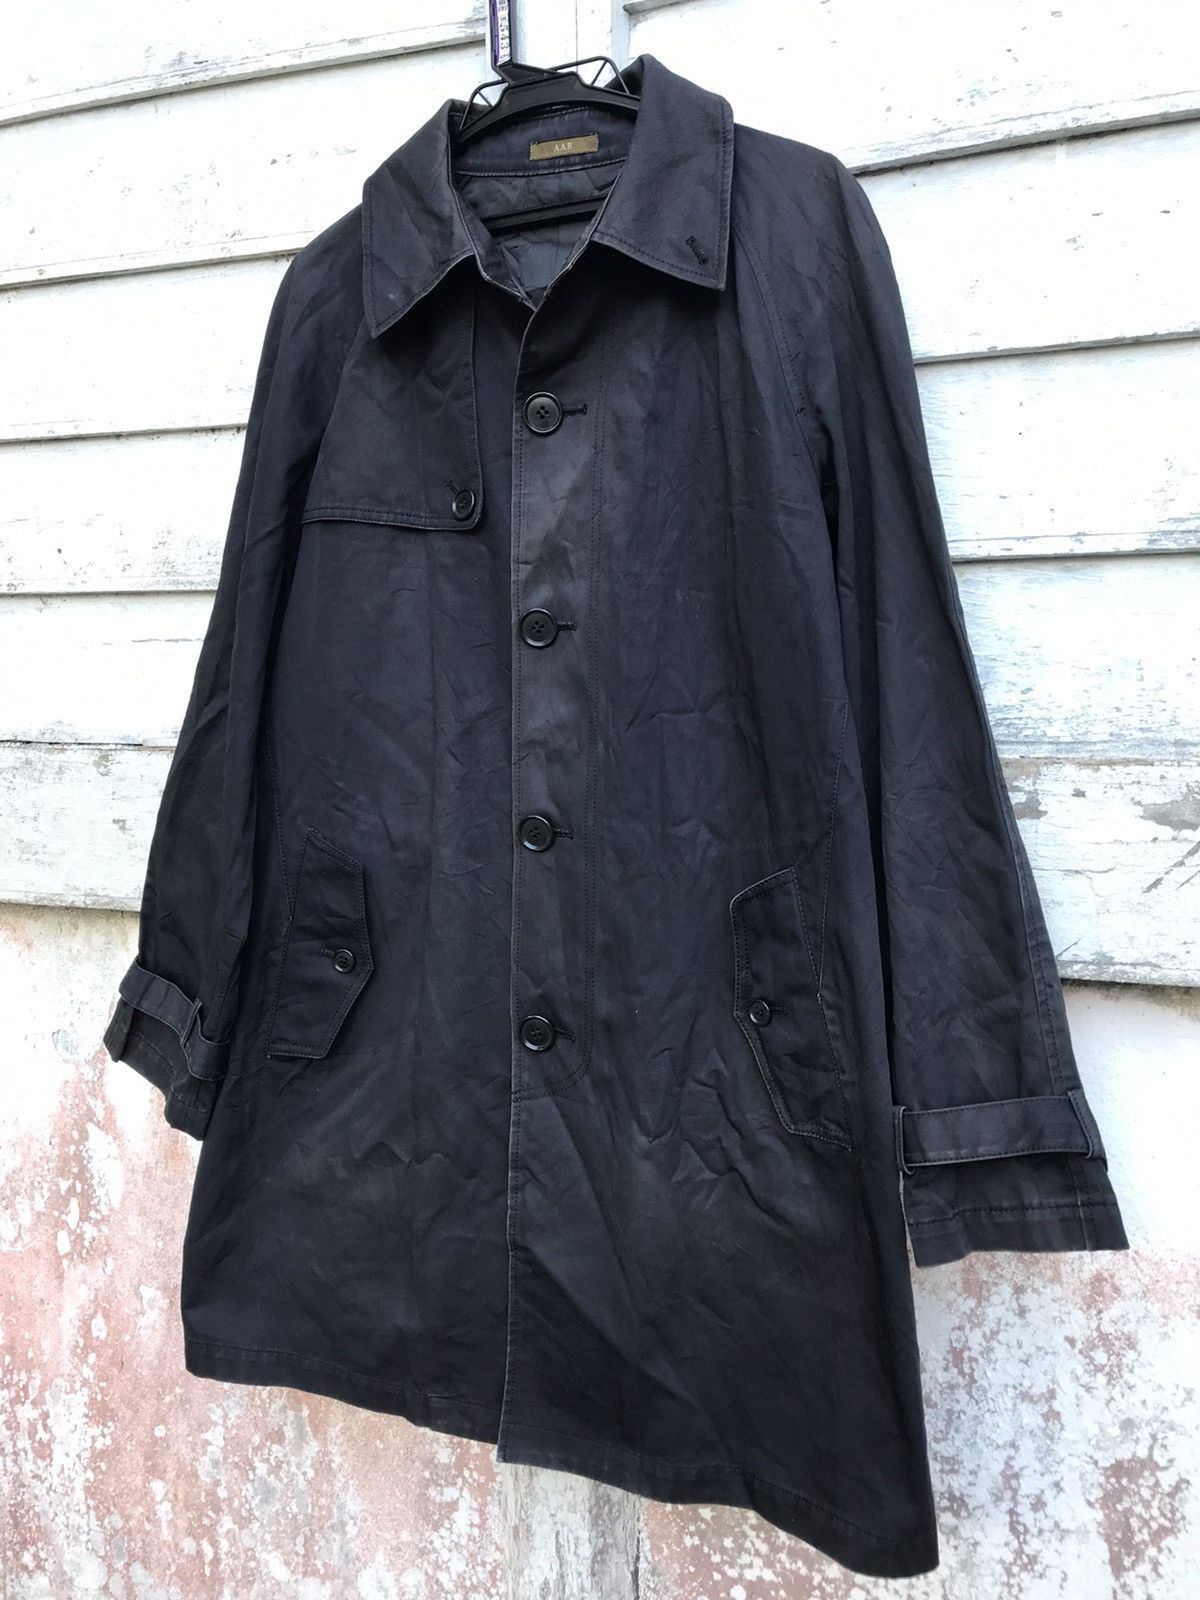 Yohji Yamamoto Against All Risk (A.R.R )Trench Coat - 2